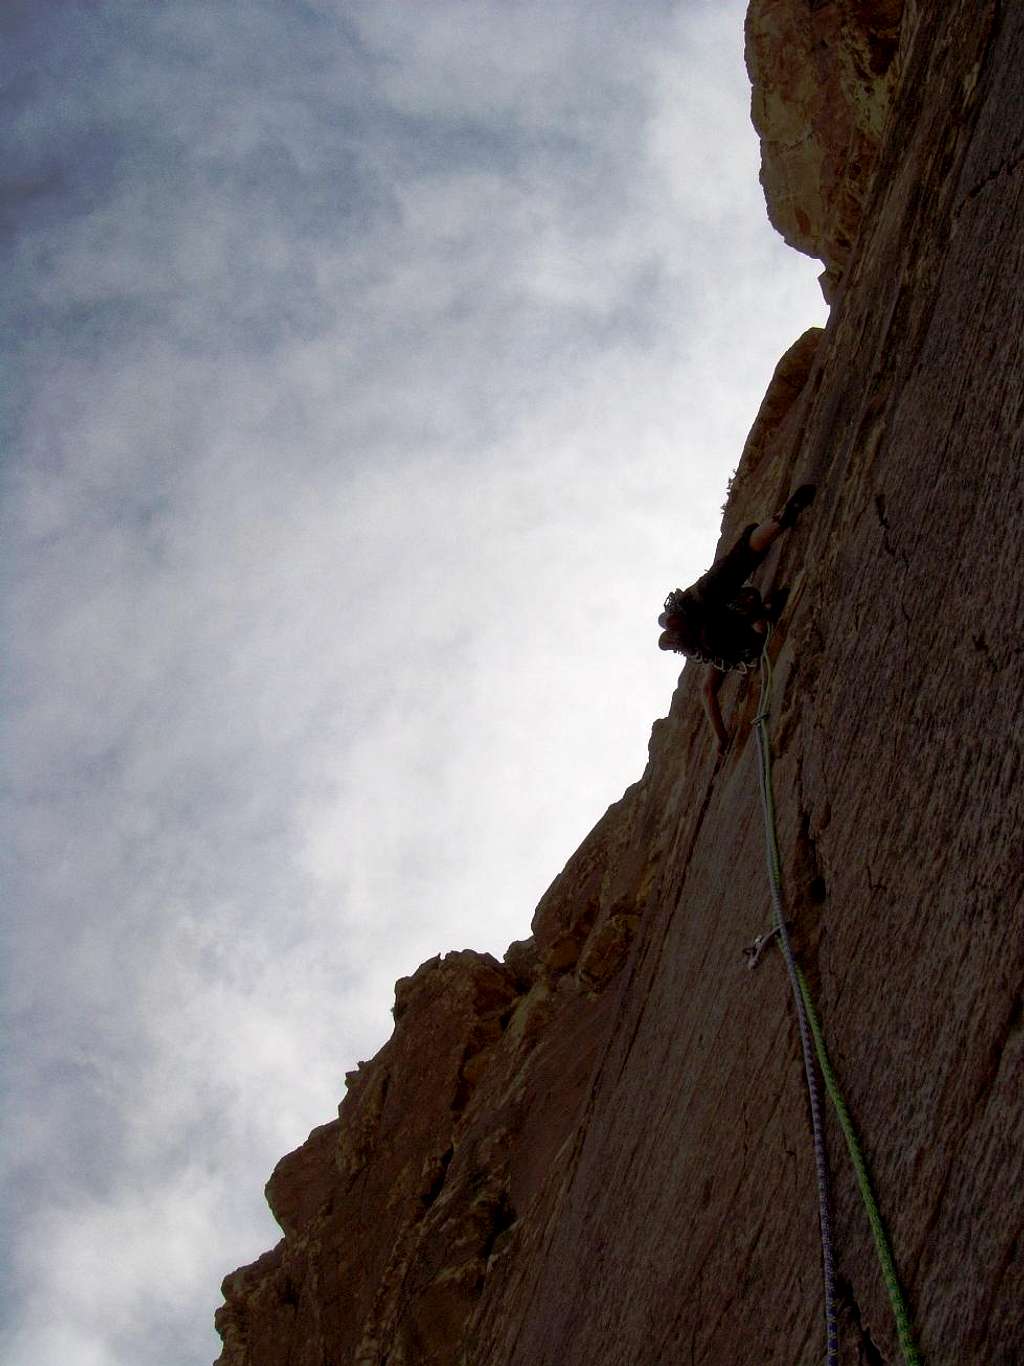 Prince of Darkness, 5.10c